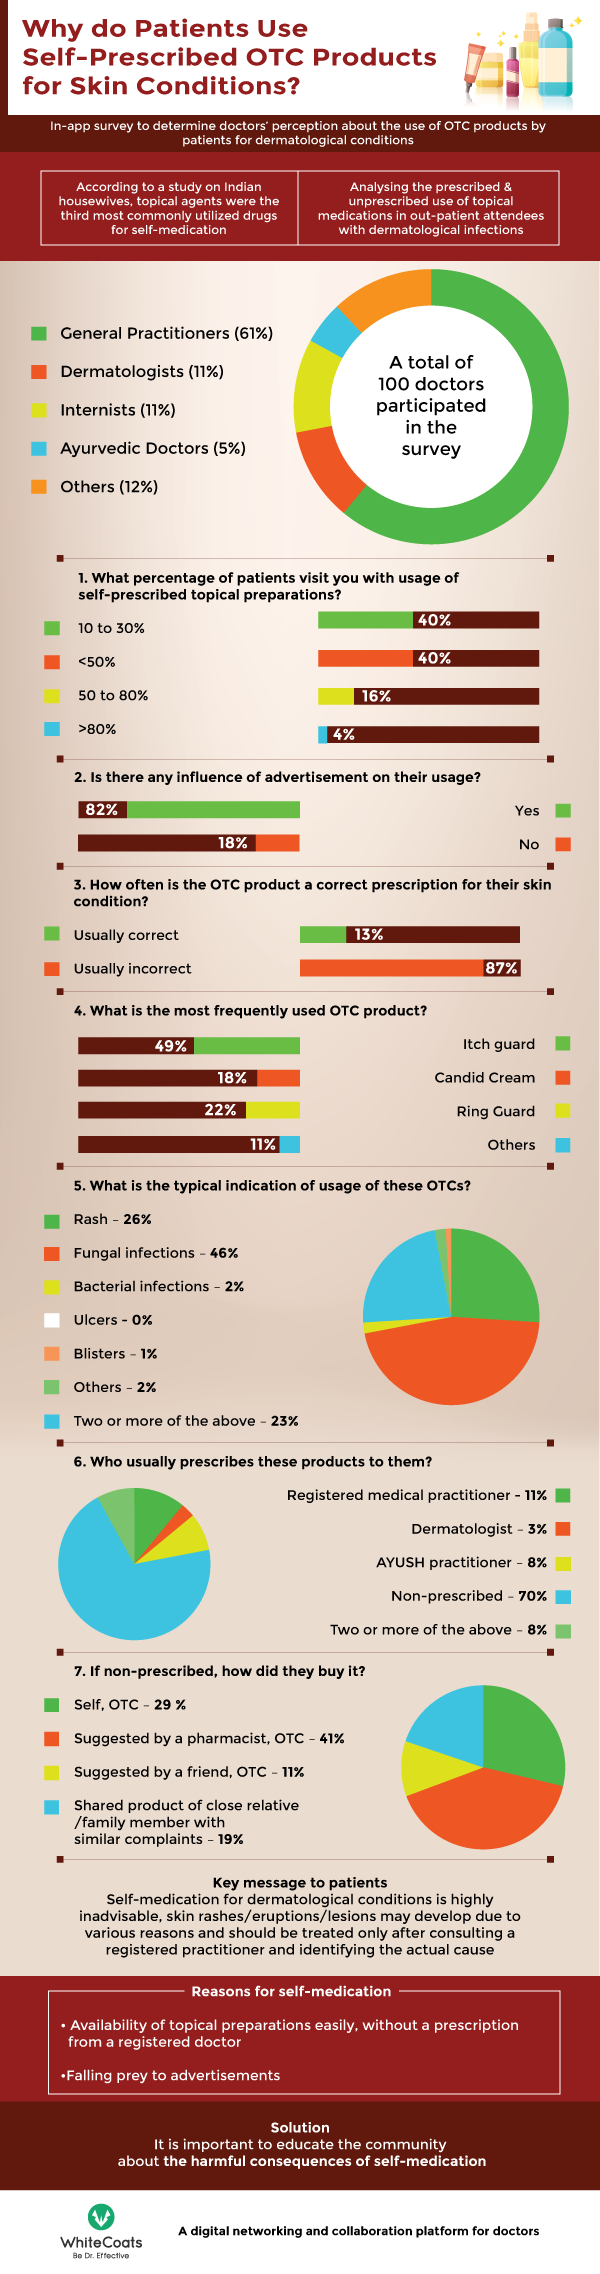 Doctors Perception About The Use of OTC Products by Patients